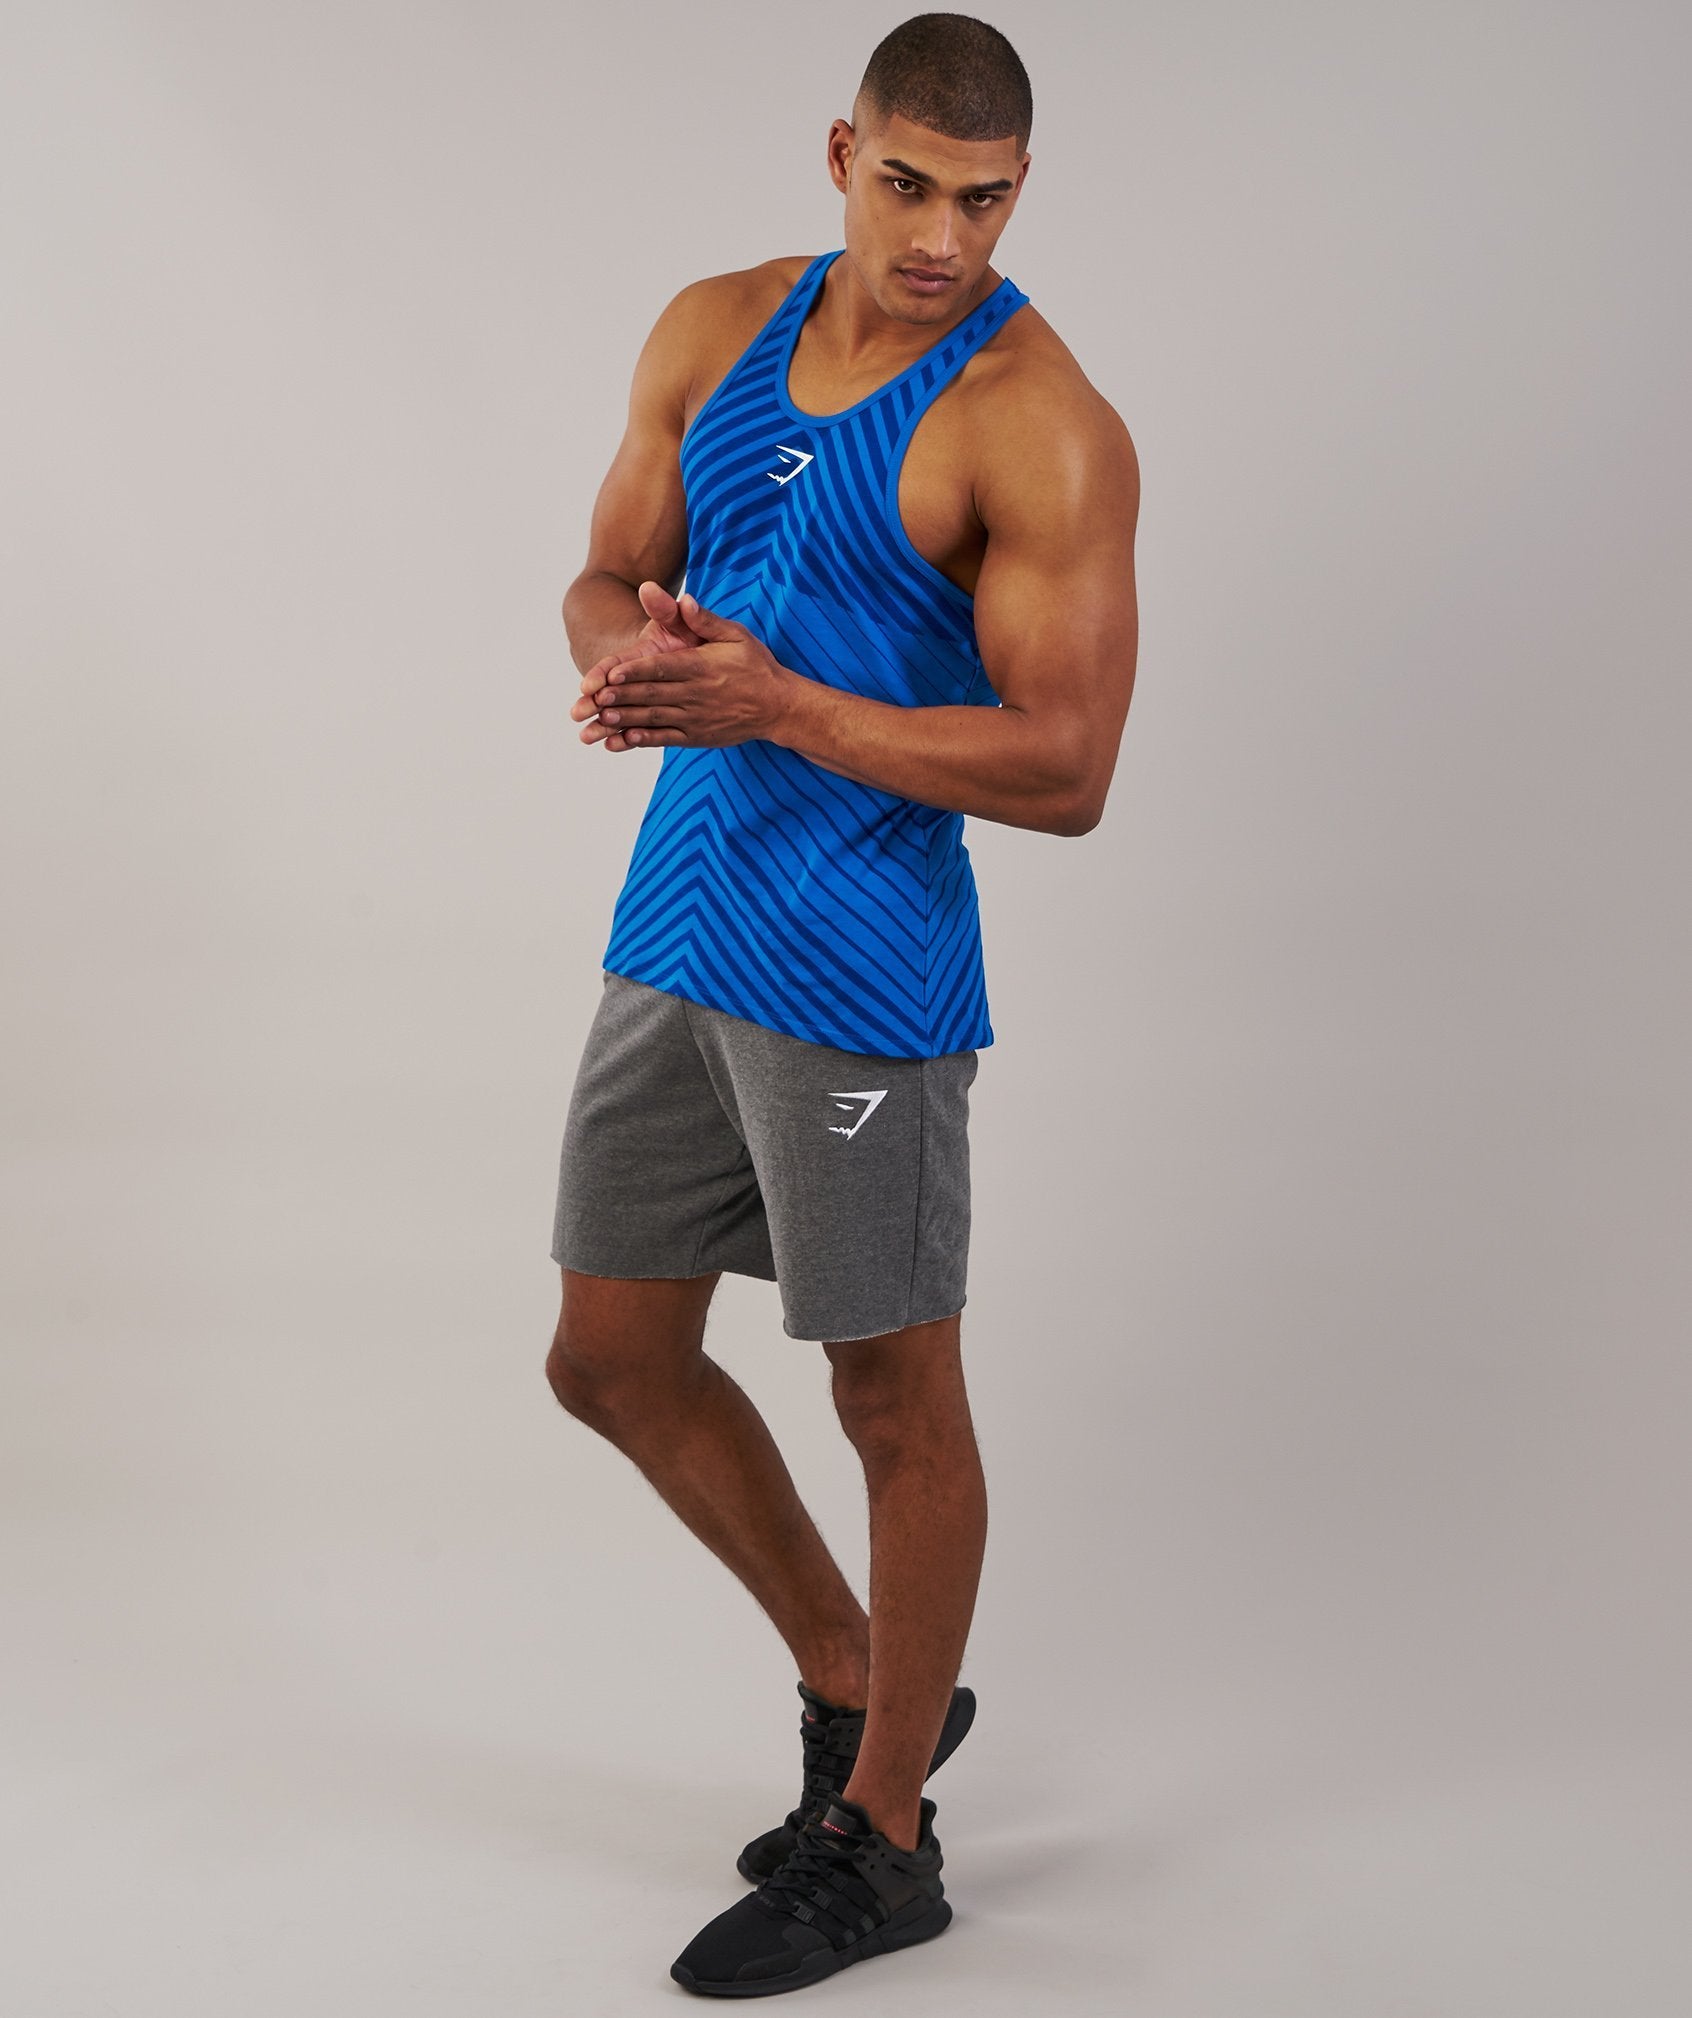 Freestyle ION Stringer in Dive Blue - view 4